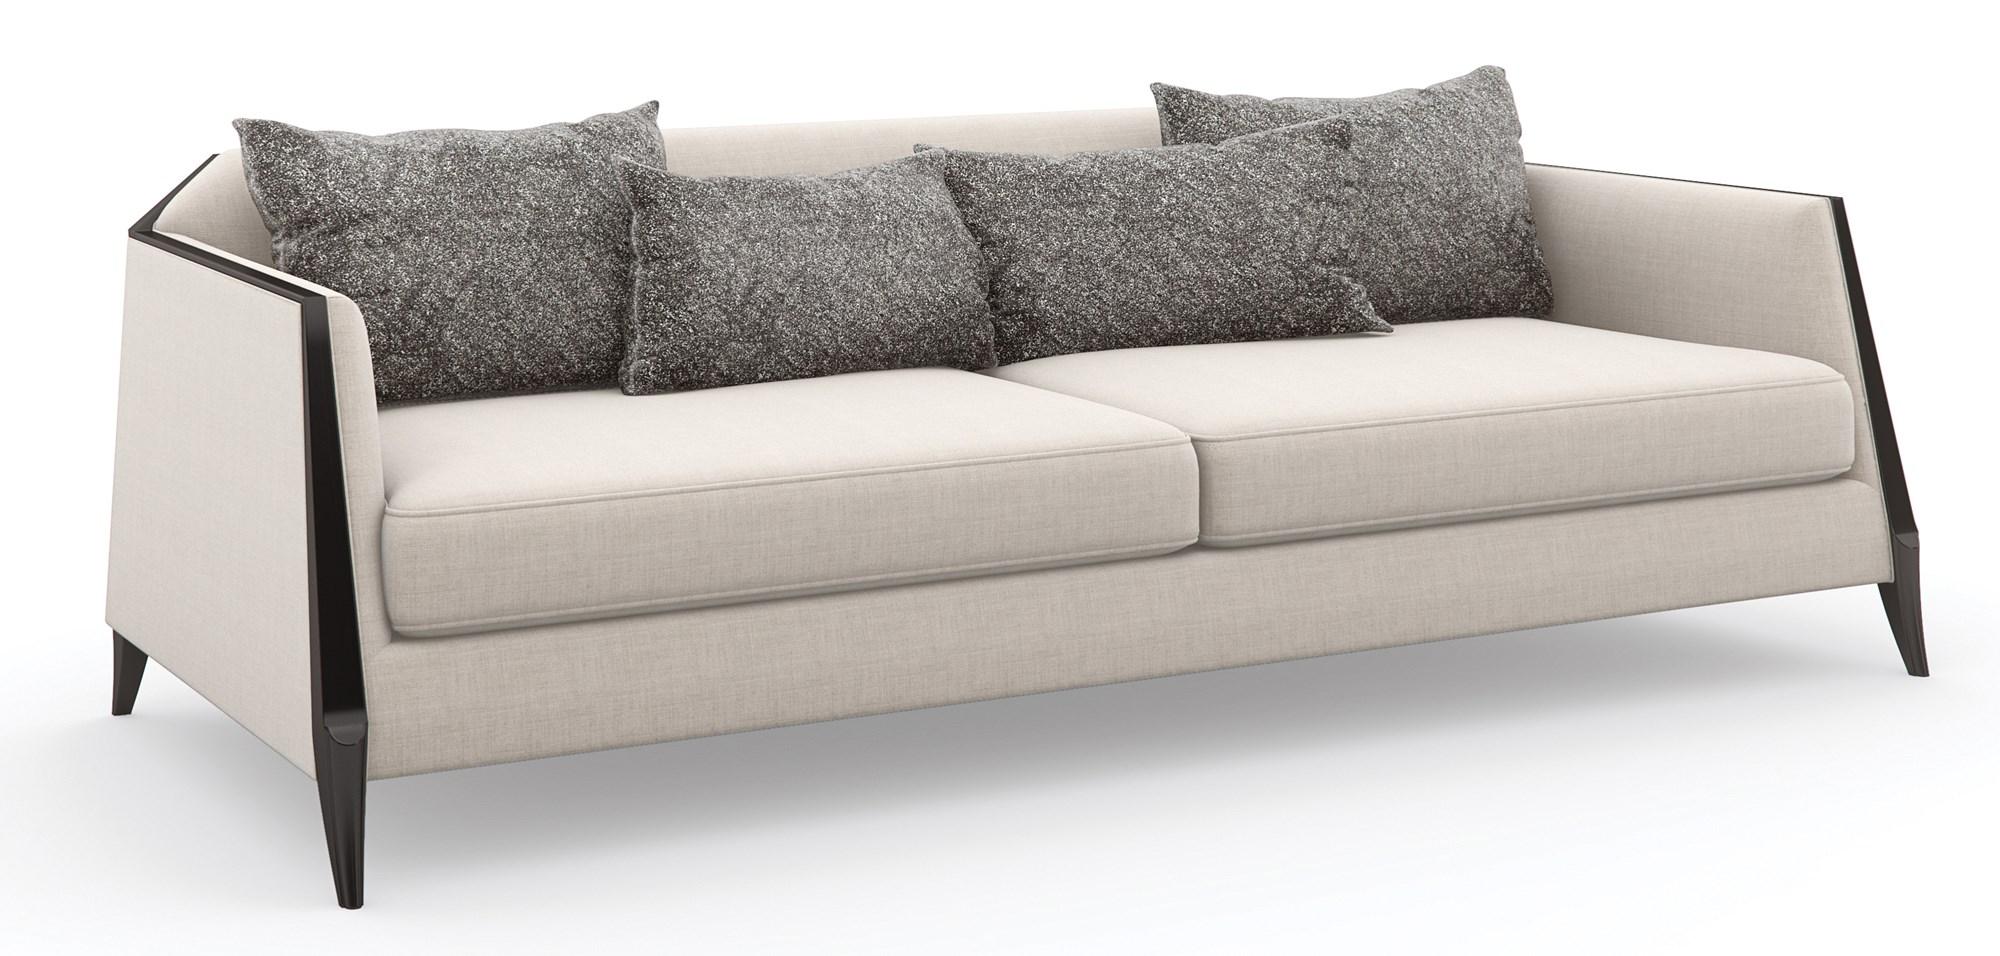 Contemporary Sofa OUTLINE SOFA UPH-020-012-A in Light Gray, Brown Fabric